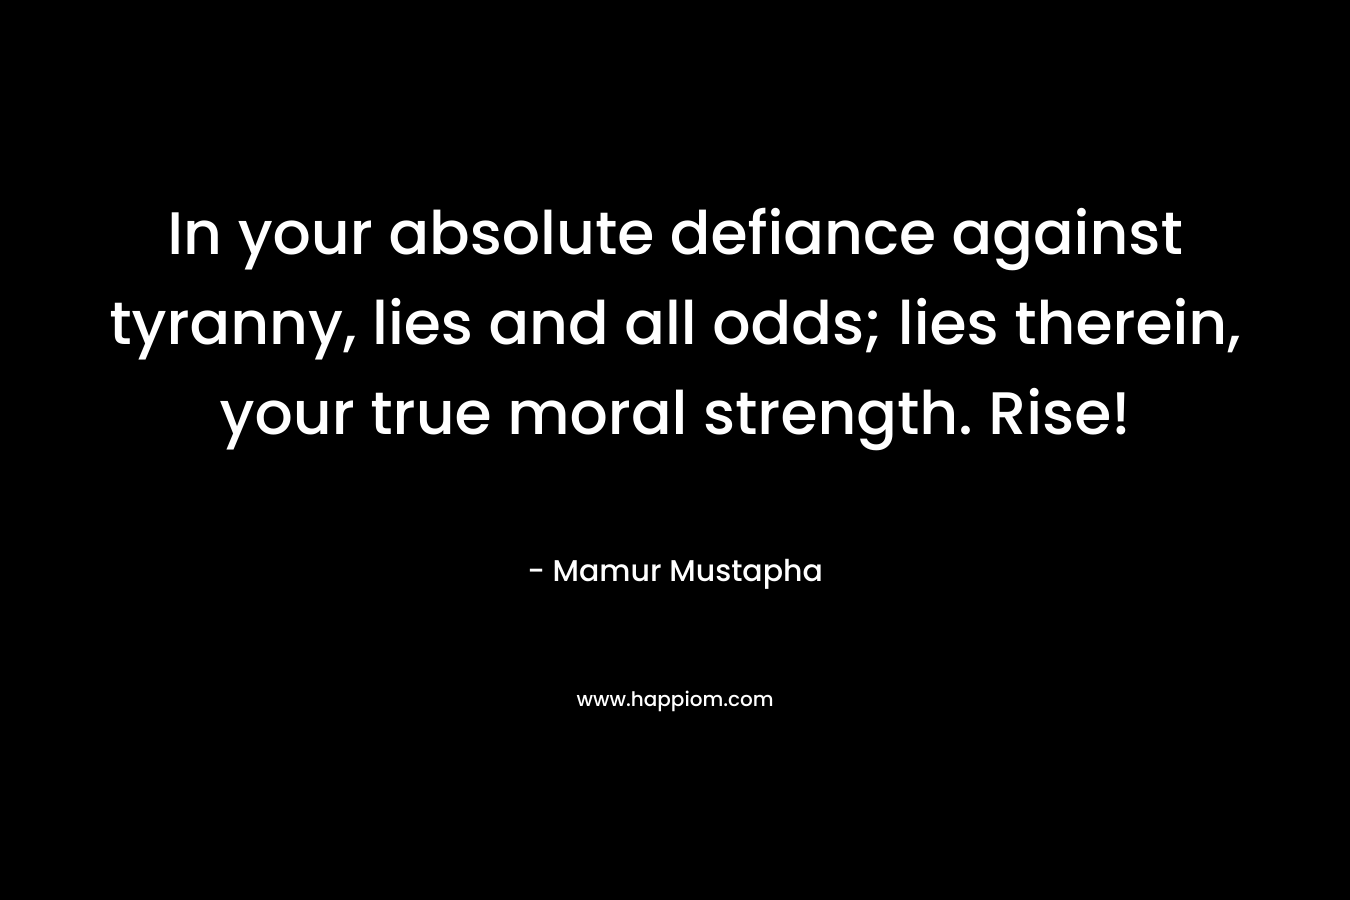 In your absolute defiance against tyranny, lies and all odds; lies therein, your true moral strength. Rise! – Mamur Mustapha